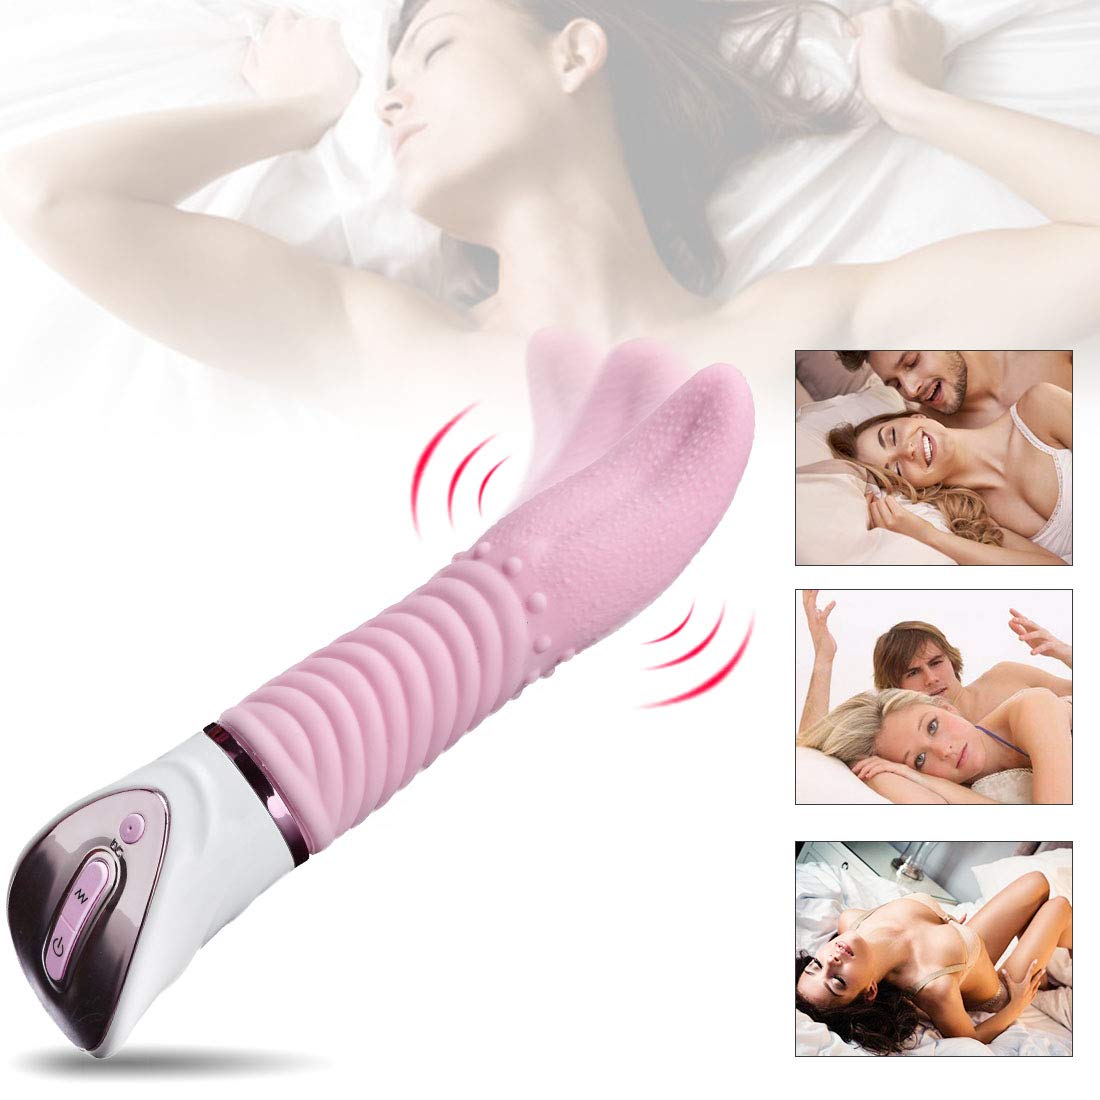 10 Speed Tongue Oral Sex G Spot Vibrating Massager - Lusty Age